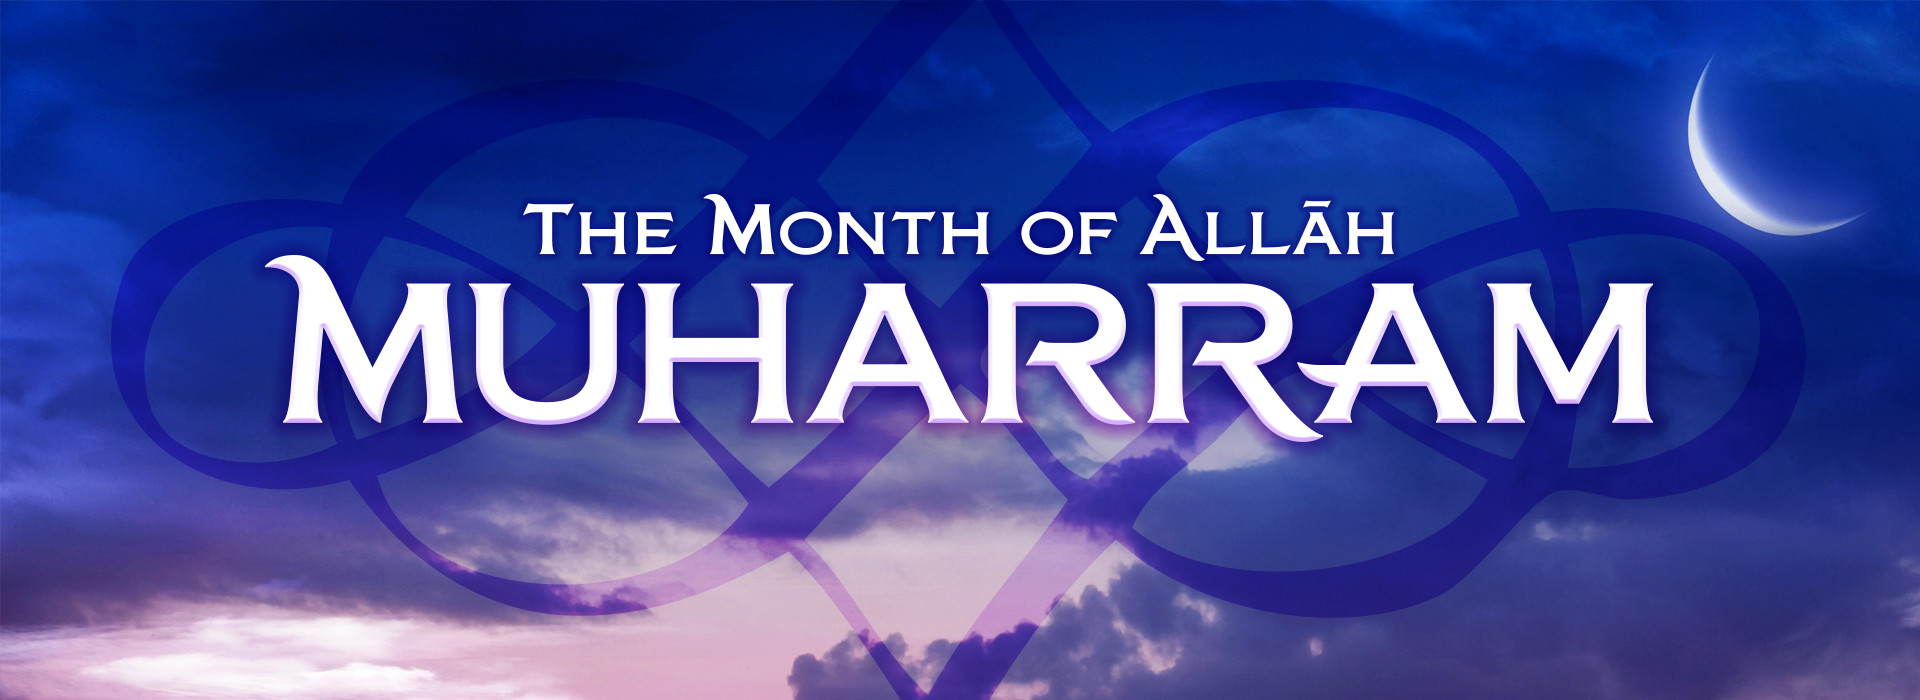 5 Ways to Make the Most of Muharram The Month of Allah HHUGS